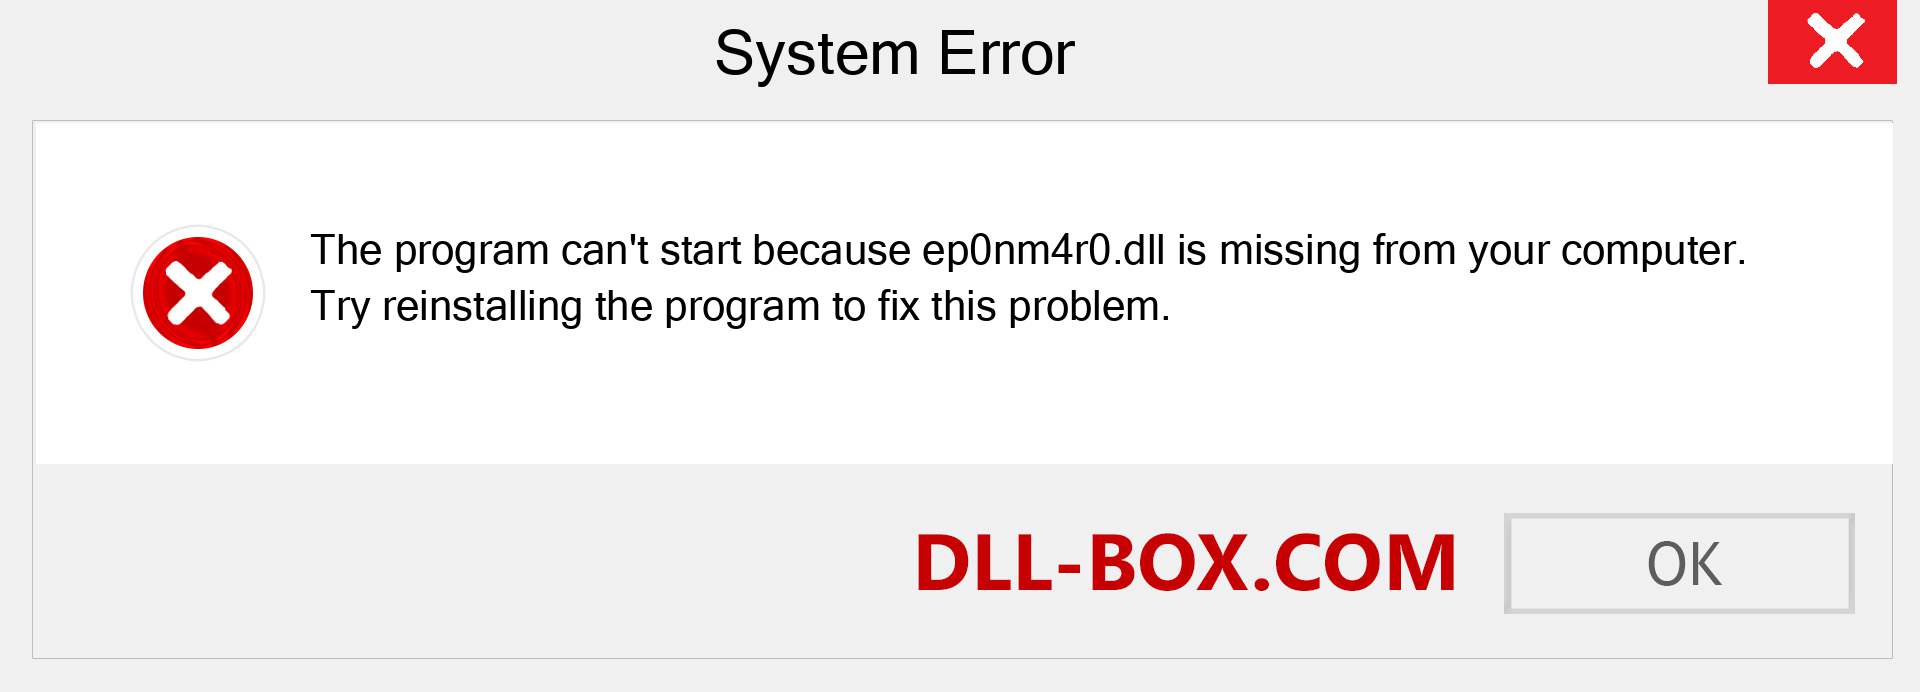  ep0nm4r0.dll file is missing?. Download for Windows 7, 8, 10 - Fix  ep0nm4r0 dll Missing Error on Windows, photos, images